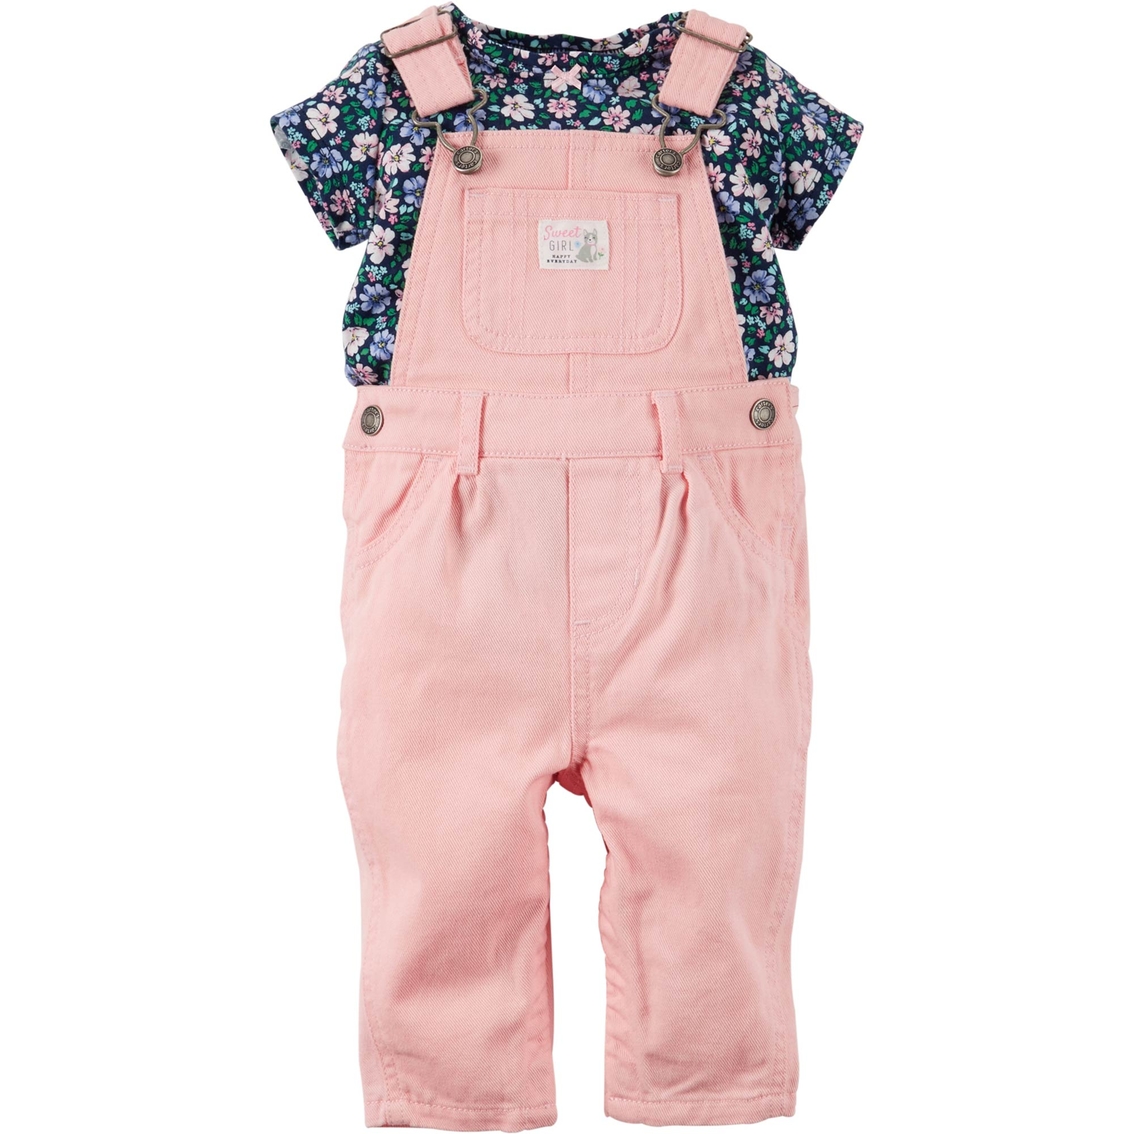 Infant Girls Top And Overalls Set 